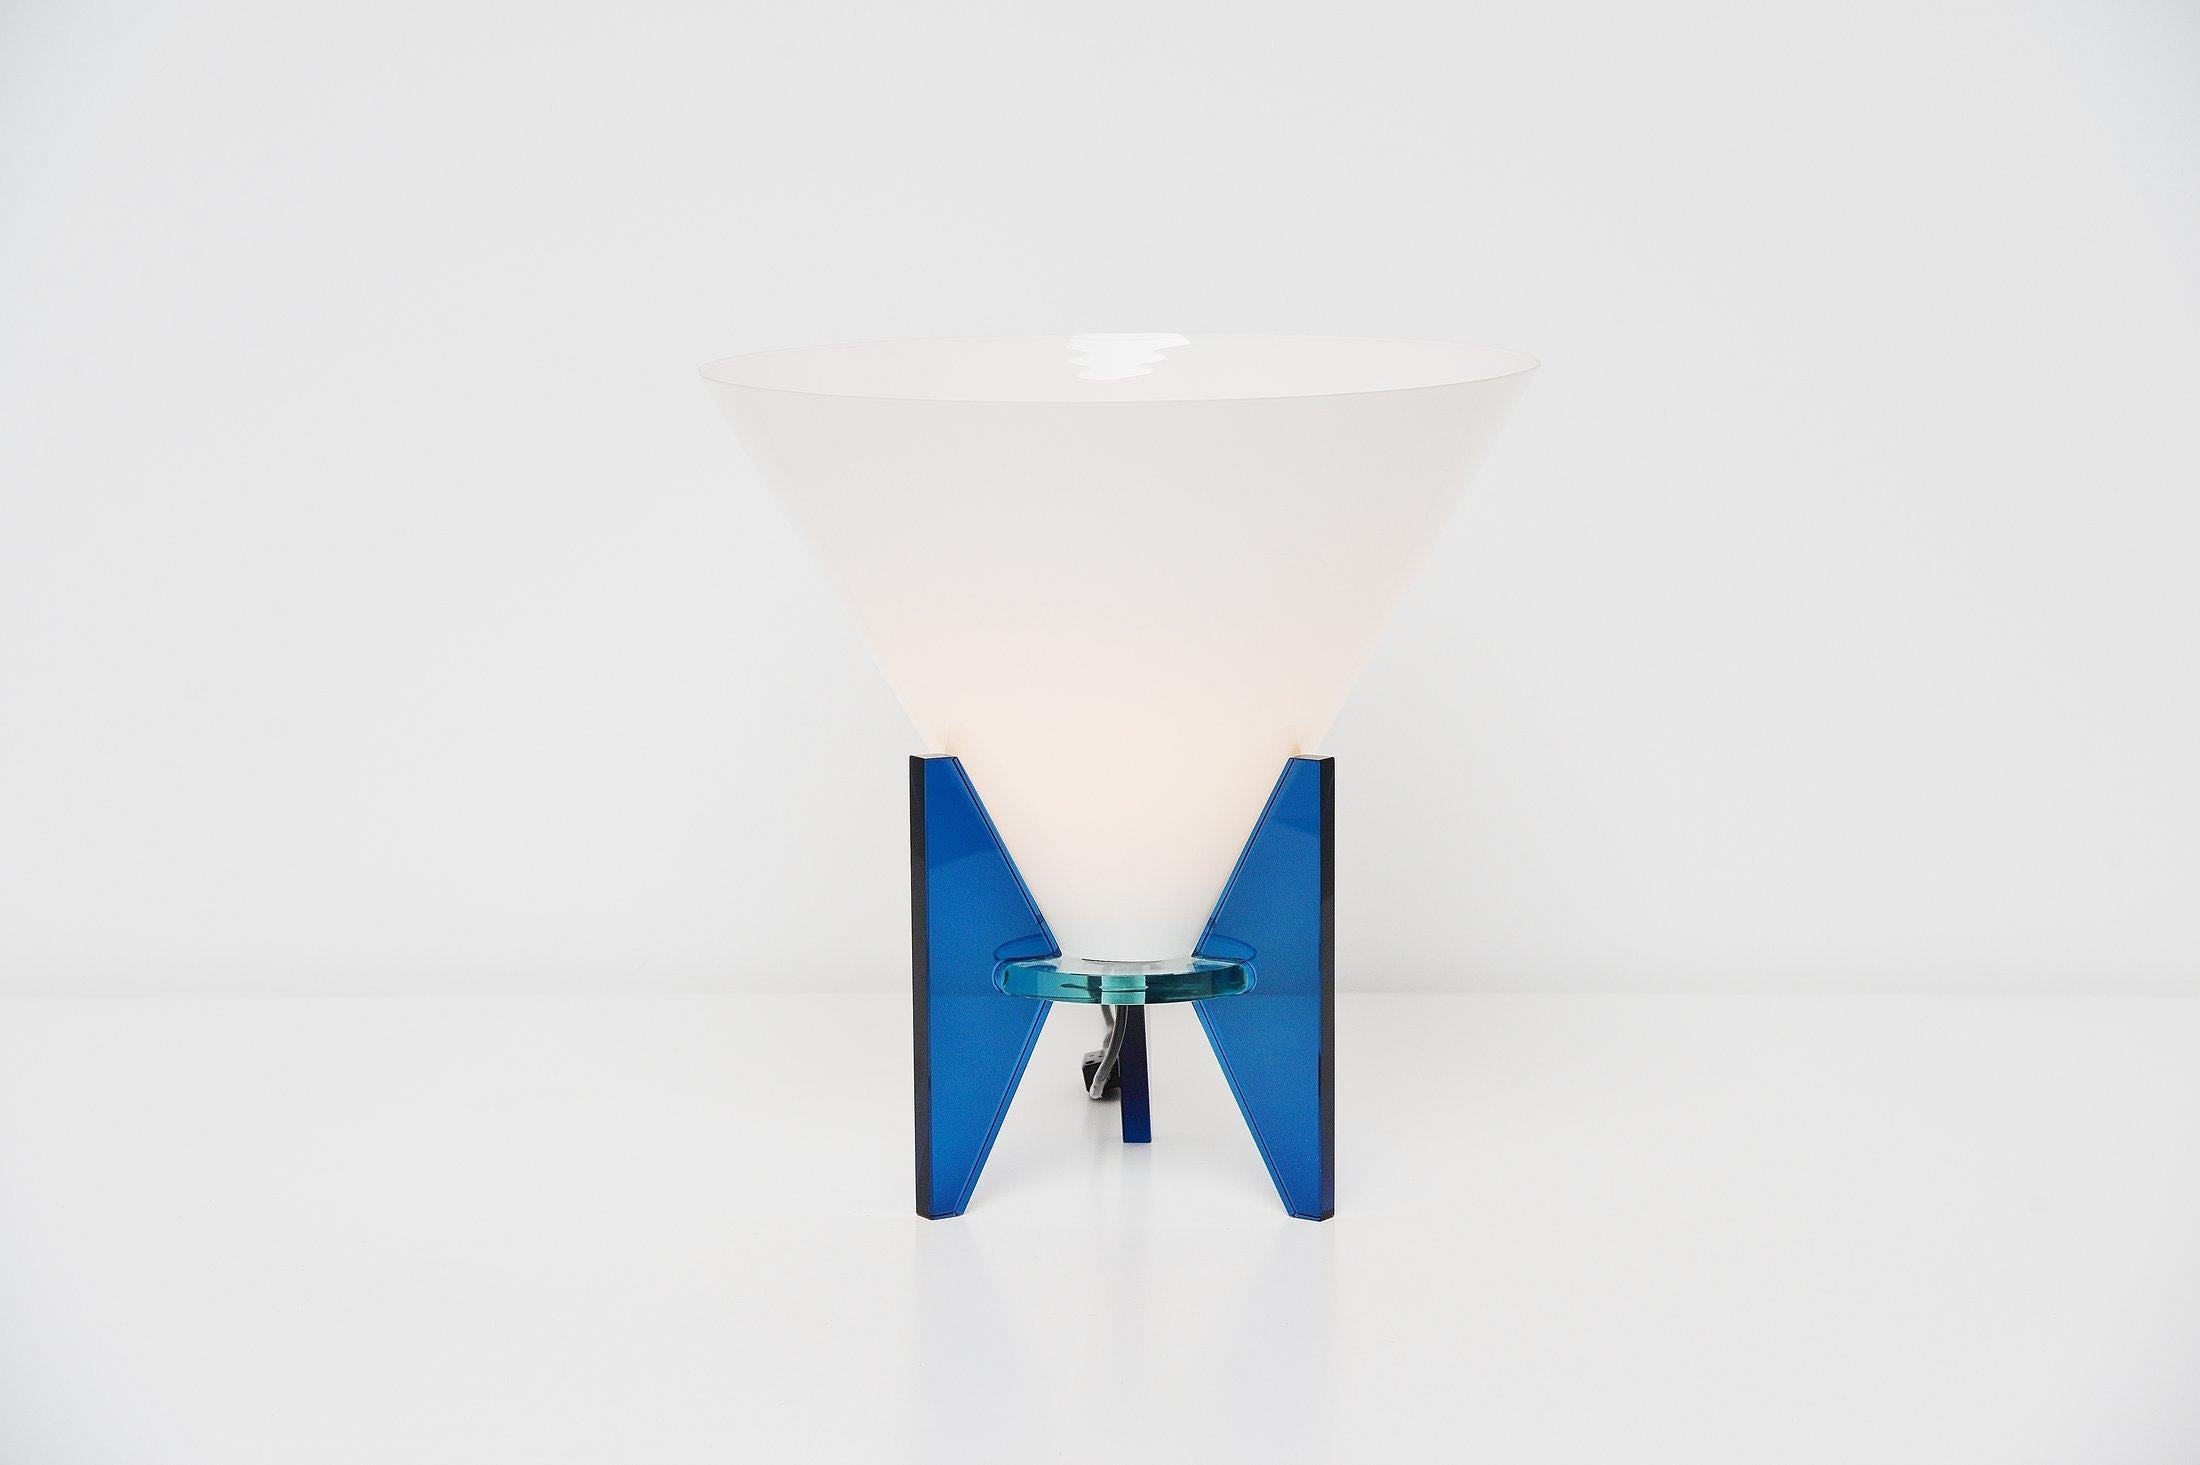 Very nice Postmodern 'Otero' table lamp designed by Rodolfo Dordoni and manufactured by Fontana Arte, Italy, 1986. The lamp is made of several different glass parts, in blue, transparent and milk colored glass. The lamp has a nice conical shape